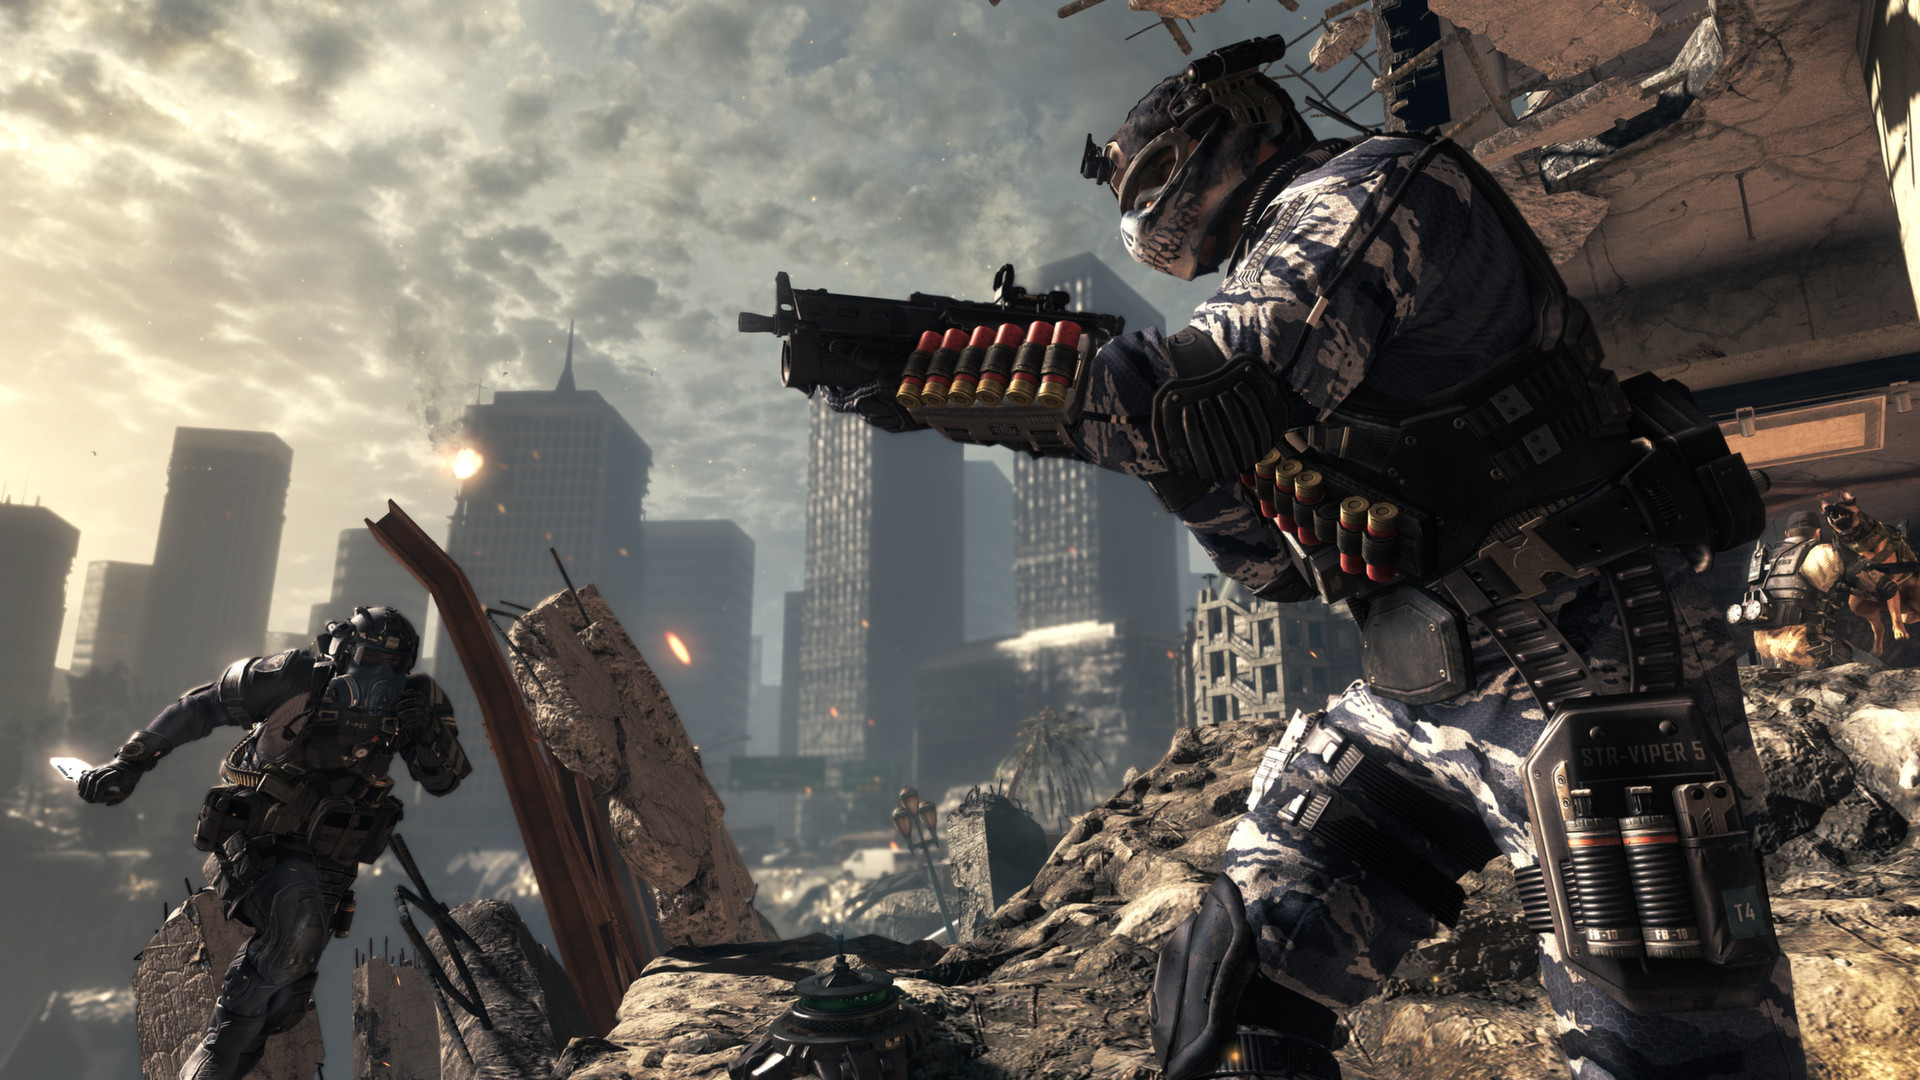 Call of Duty: Ghosts - Onslaught - Metacritic